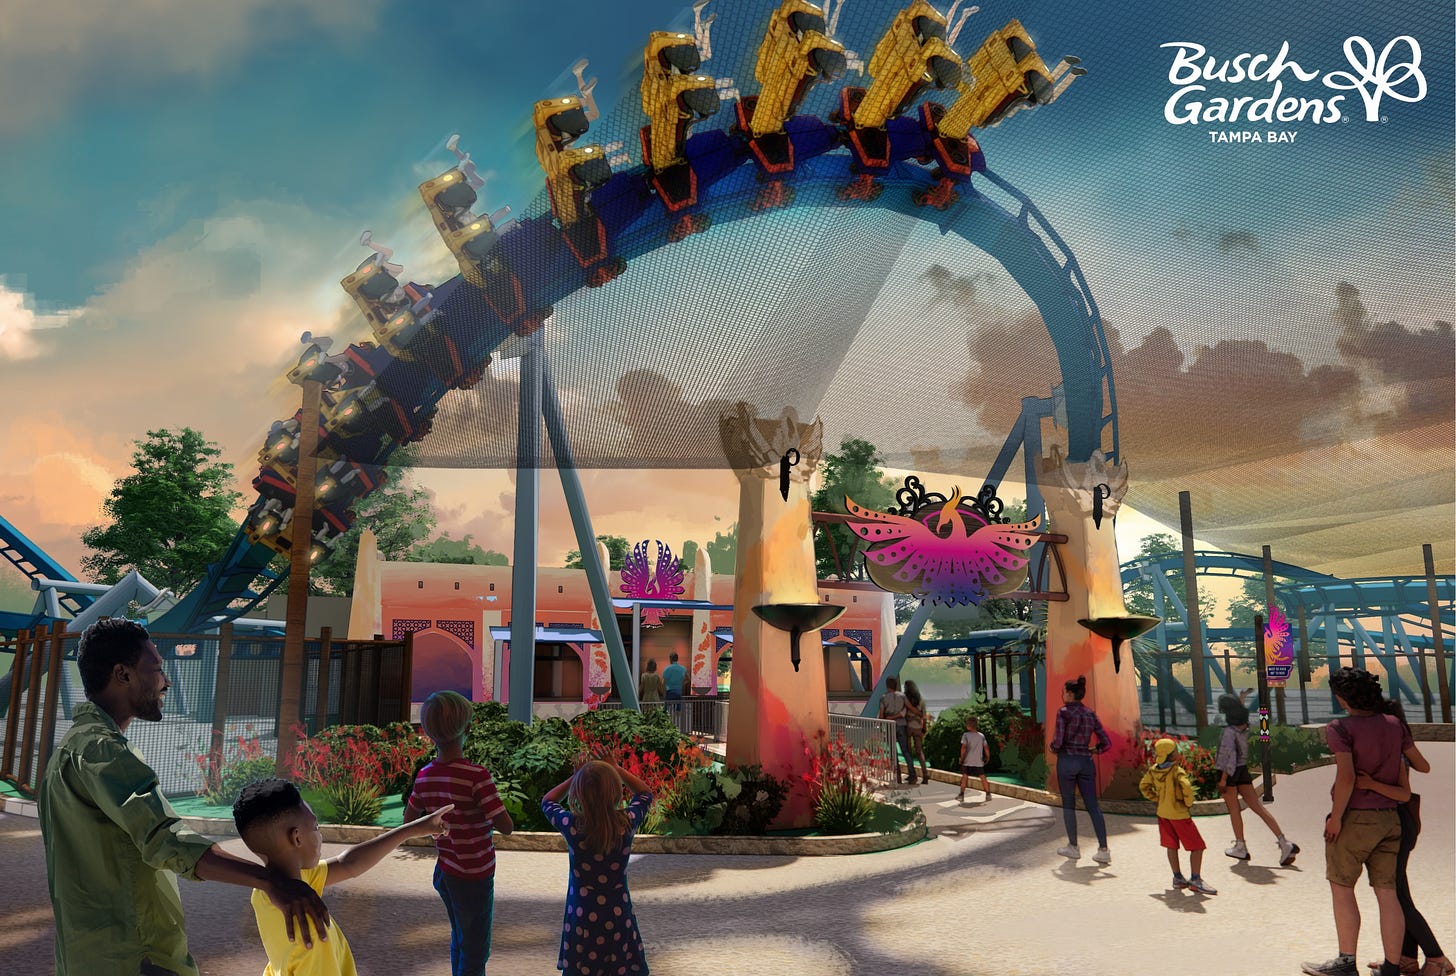 Preview of Phoenix Rising coaster at Busch Gardens Tampa